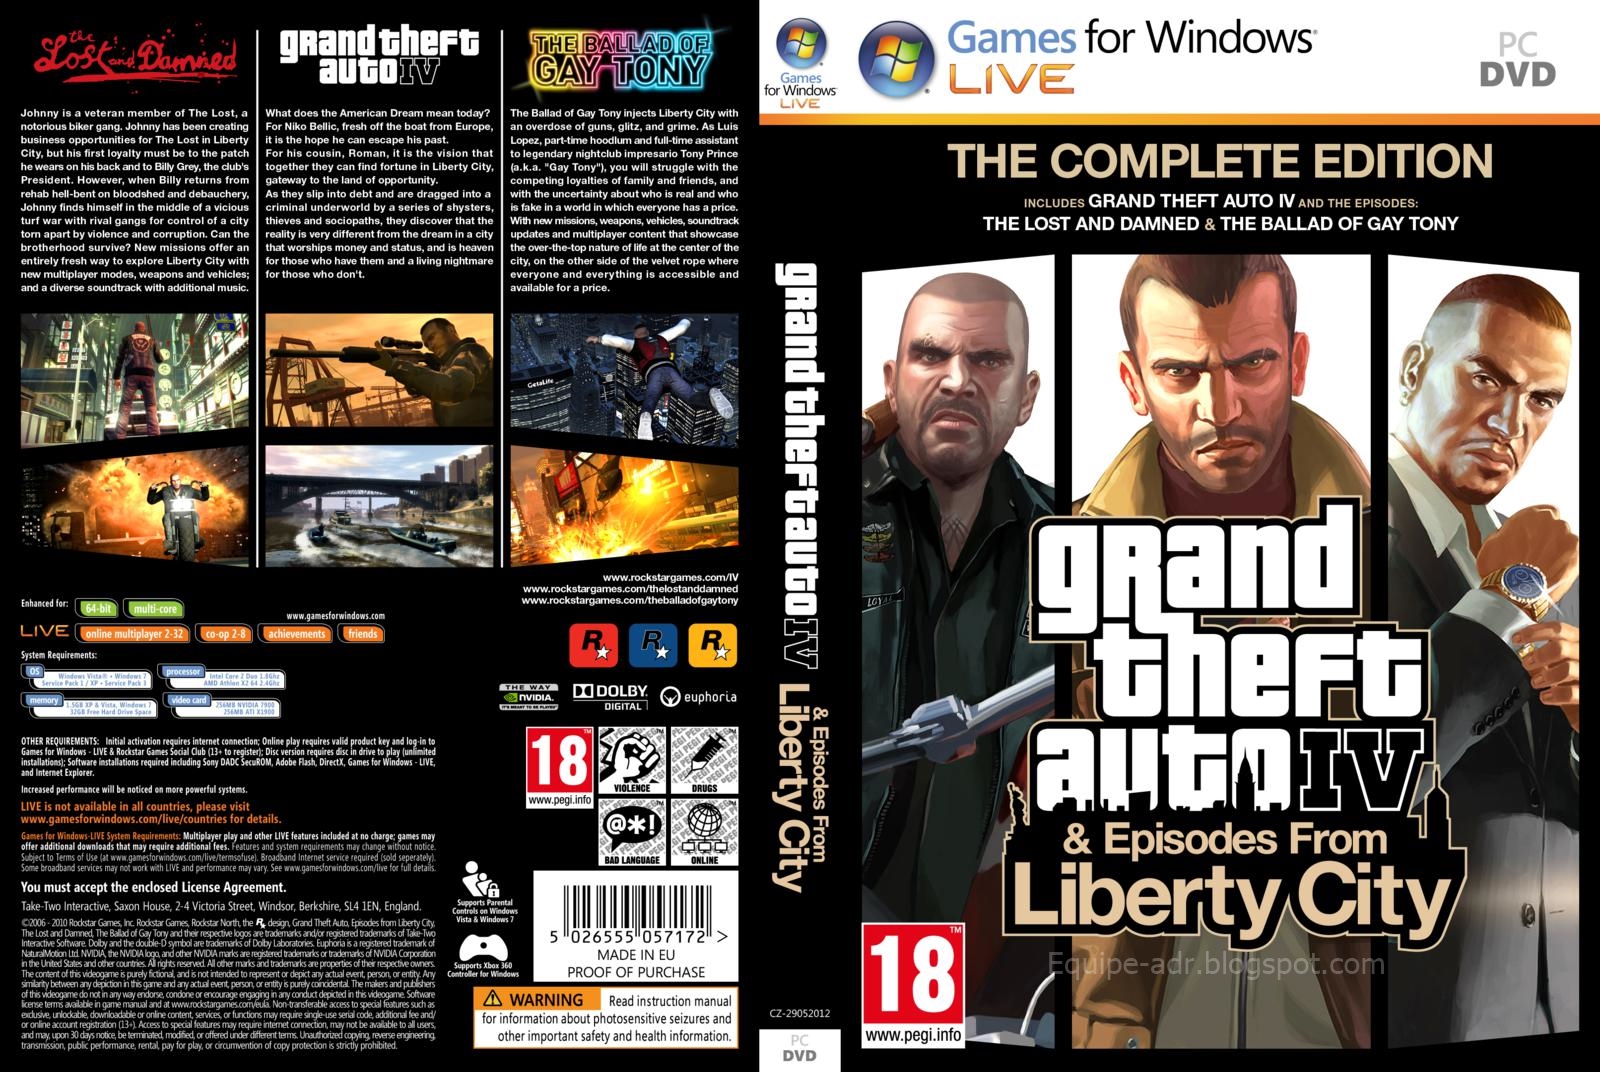 gta episodes from liberty city save data ps3